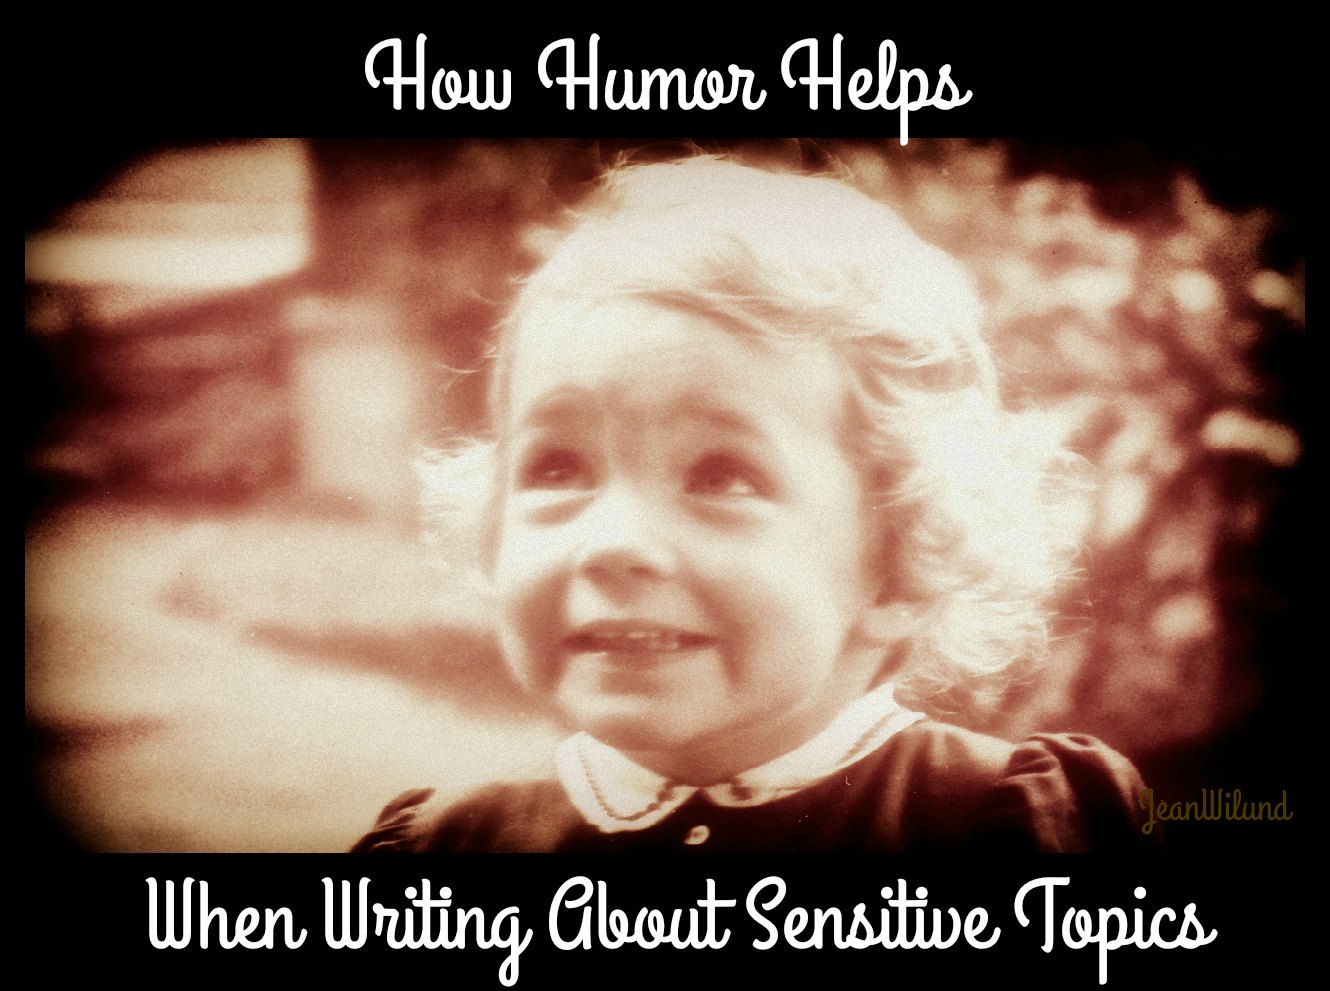 How Humor Helps When Writing About Sensitive Topics by Jean Wilund